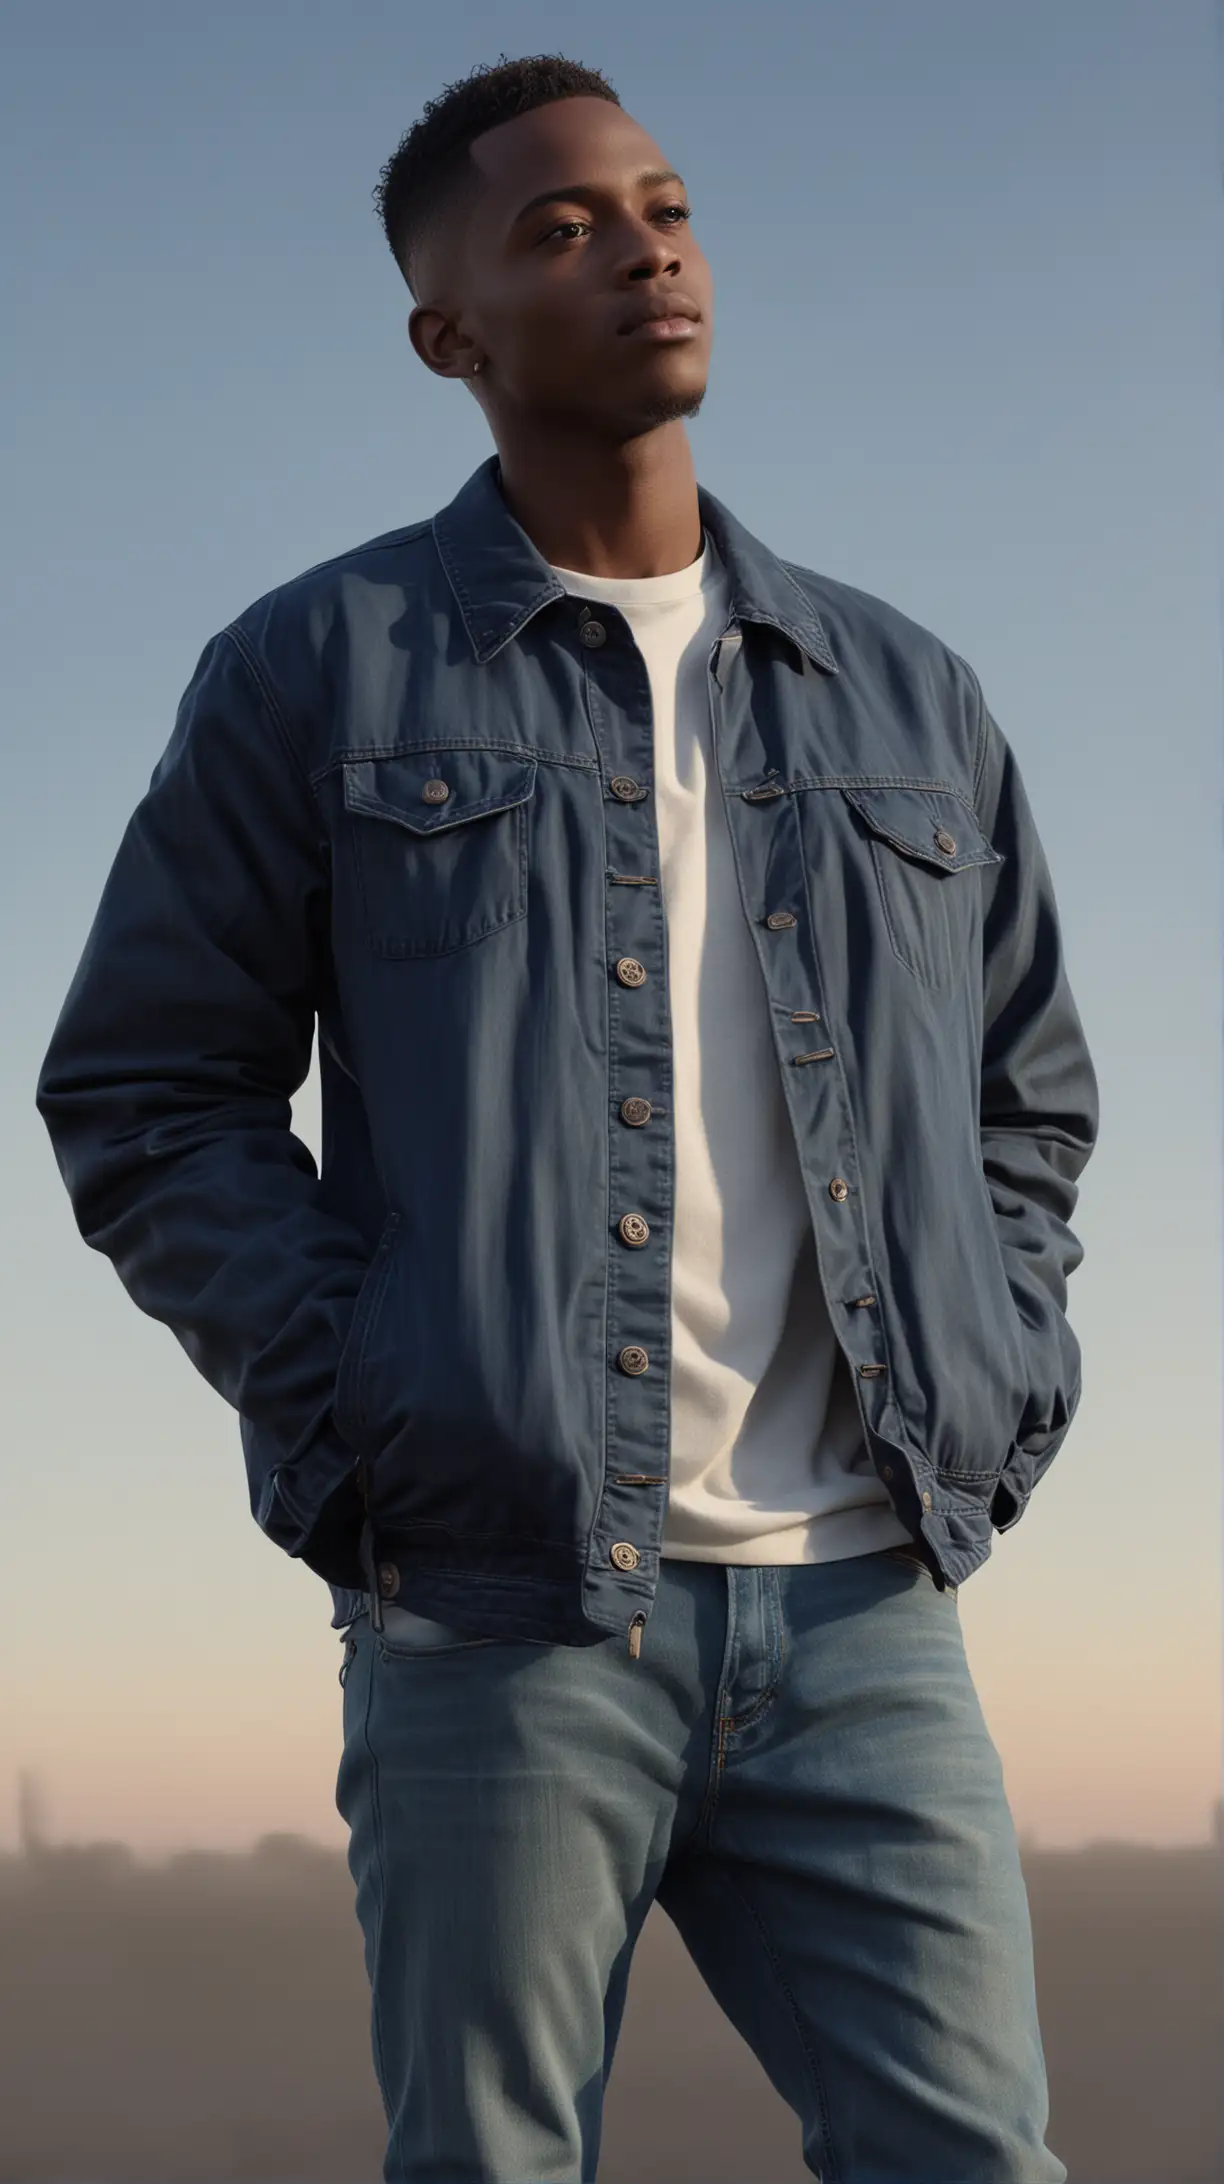 Young African American Man in Stylish Urban Attire Under Bright Afternoon Sky